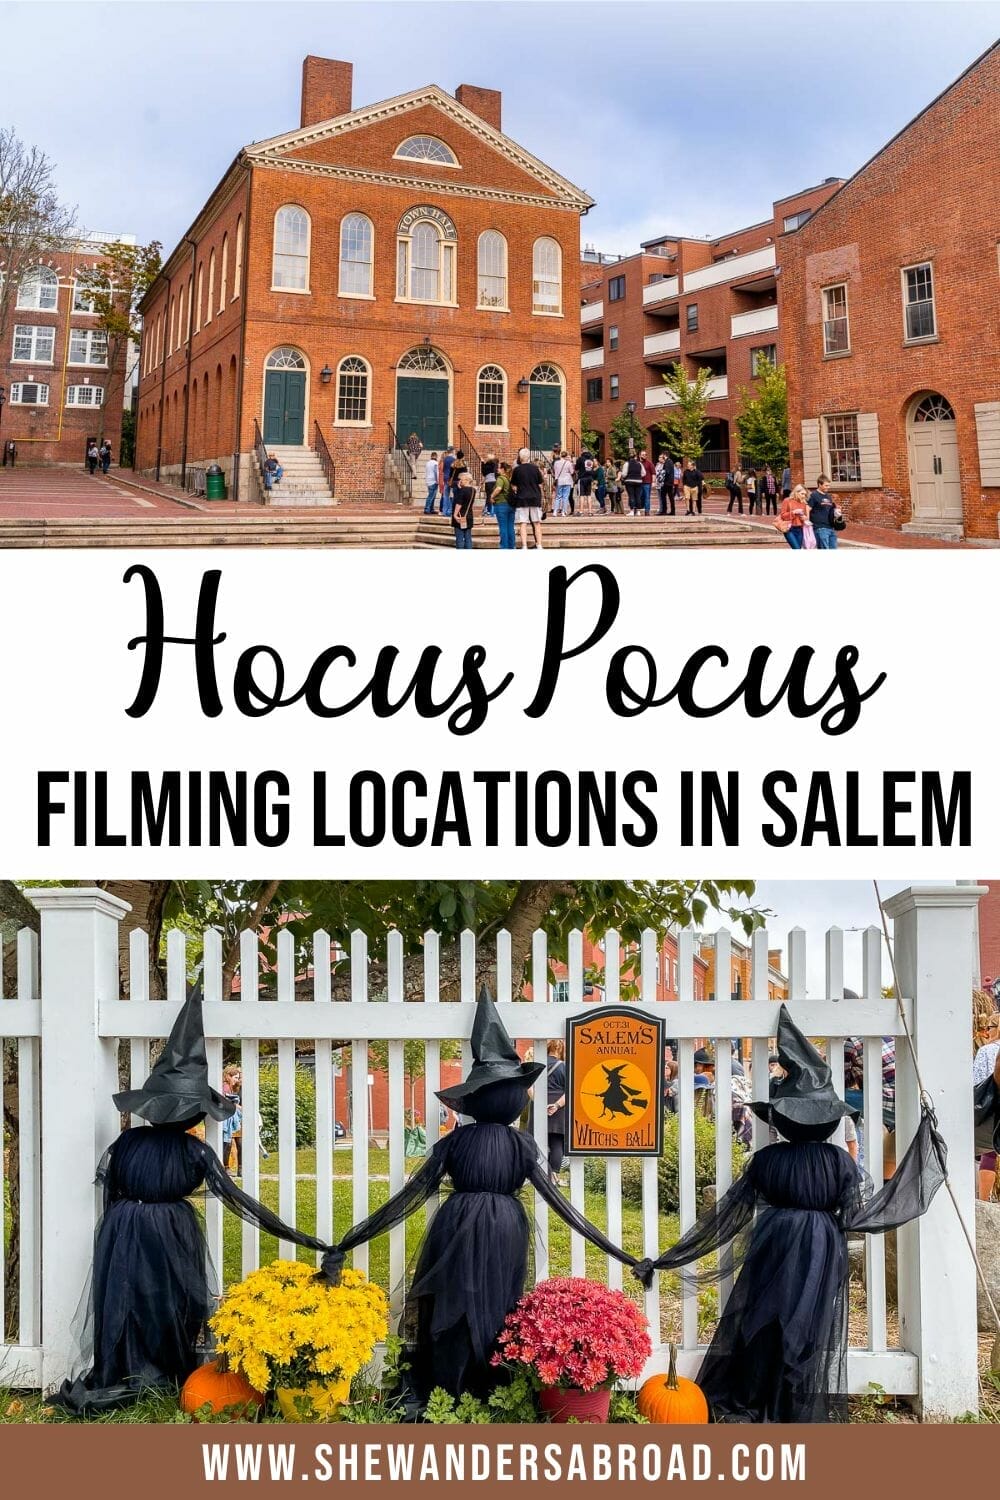 7 Hocus Pocus Filming Locations in Salem You Can’t Miss